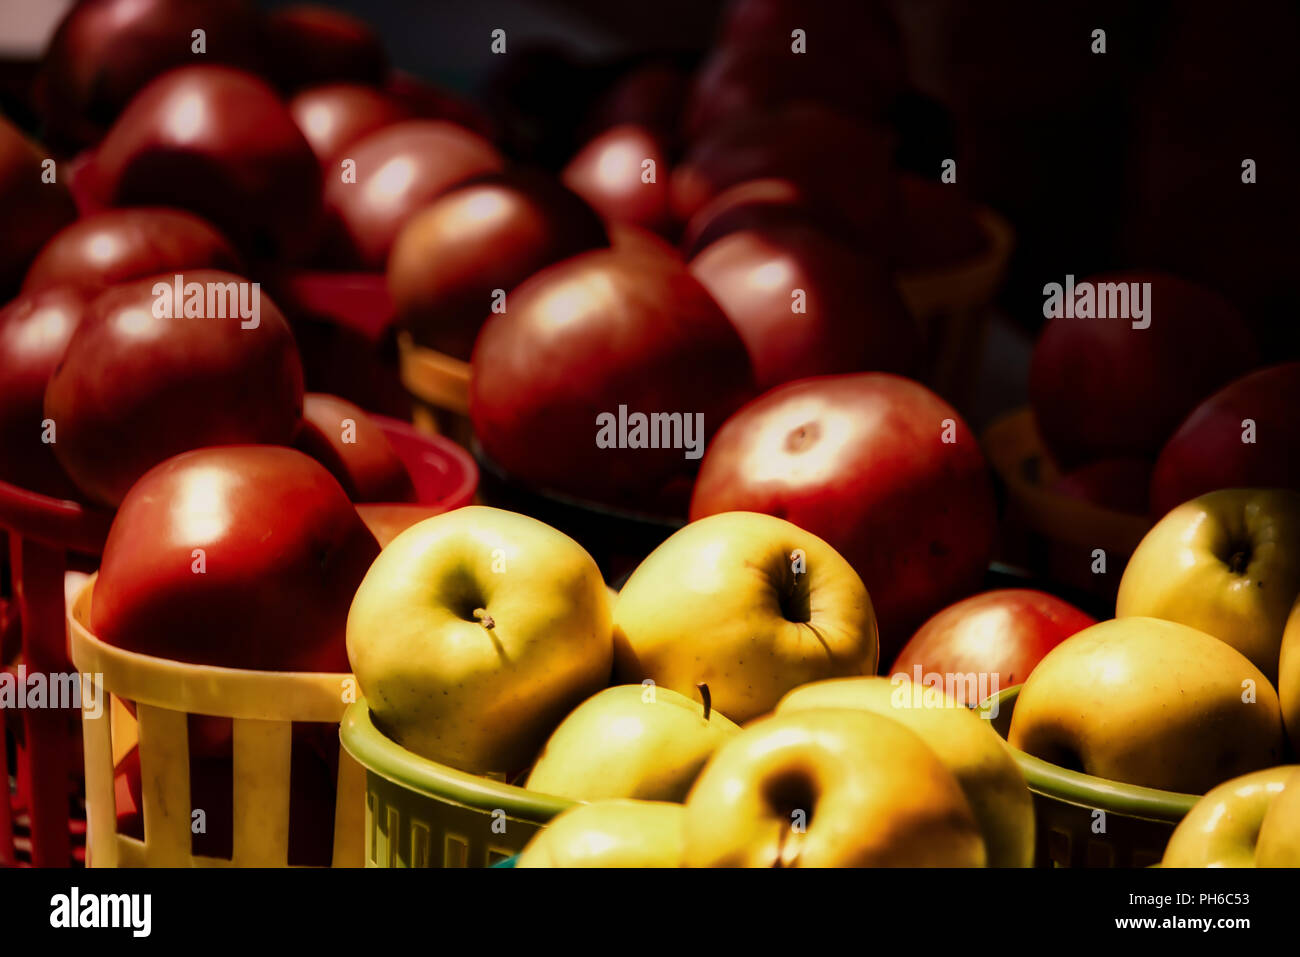 Red and Yellow apples in a basket Stock Photo